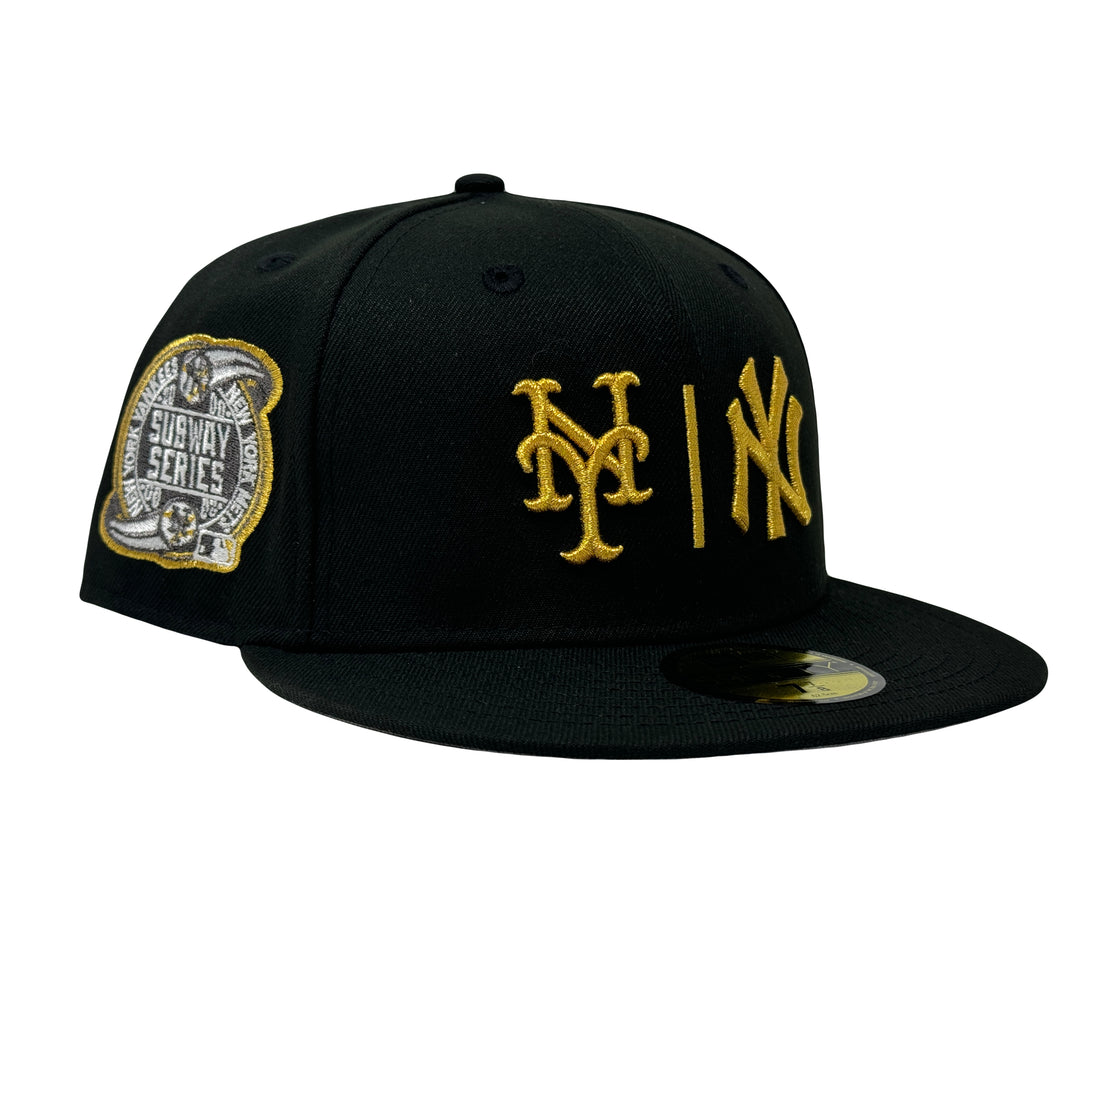 New York Yankees VS Mets Subway Series Black Gold 59Fifty New Era Fitted hat